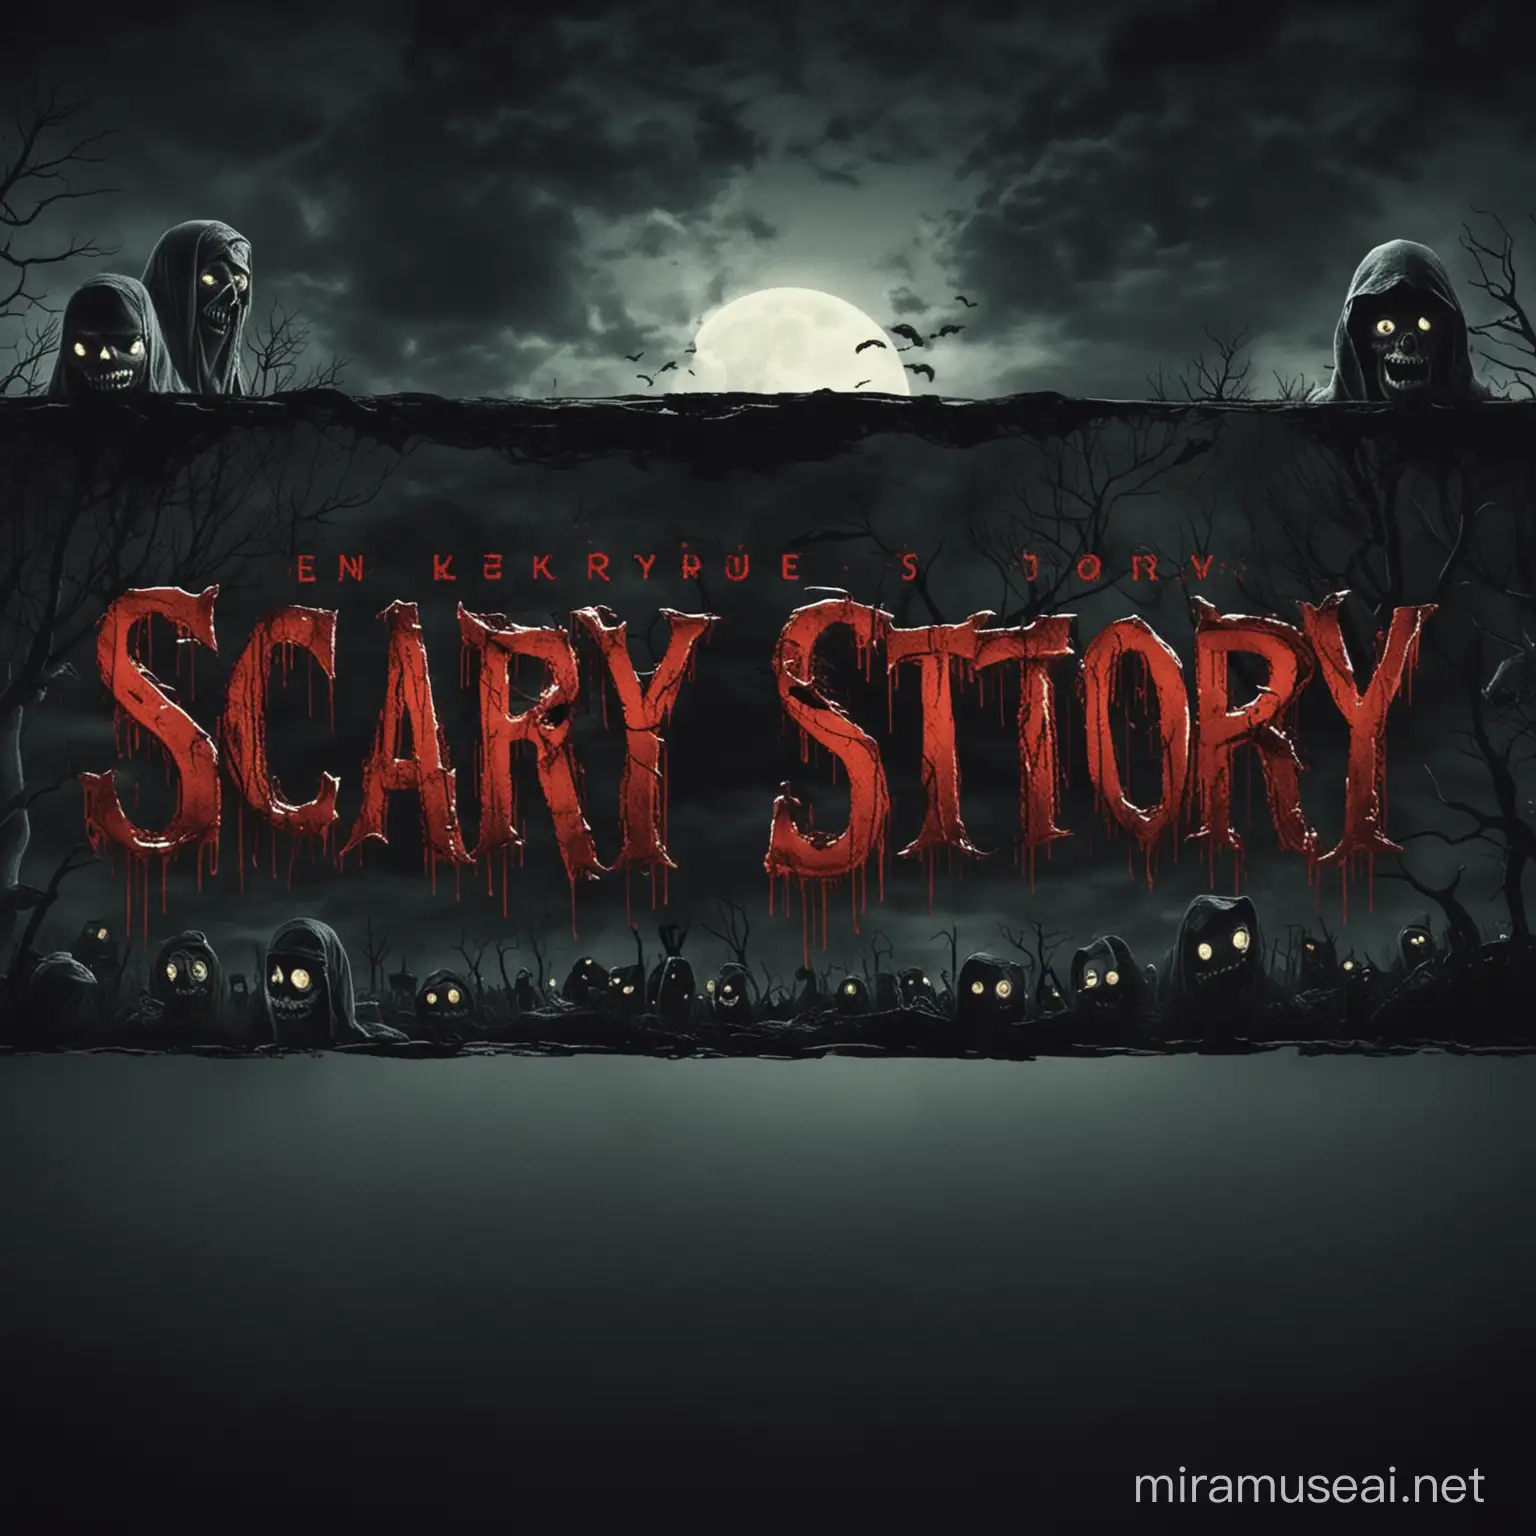 Scary story youtube channel banner 